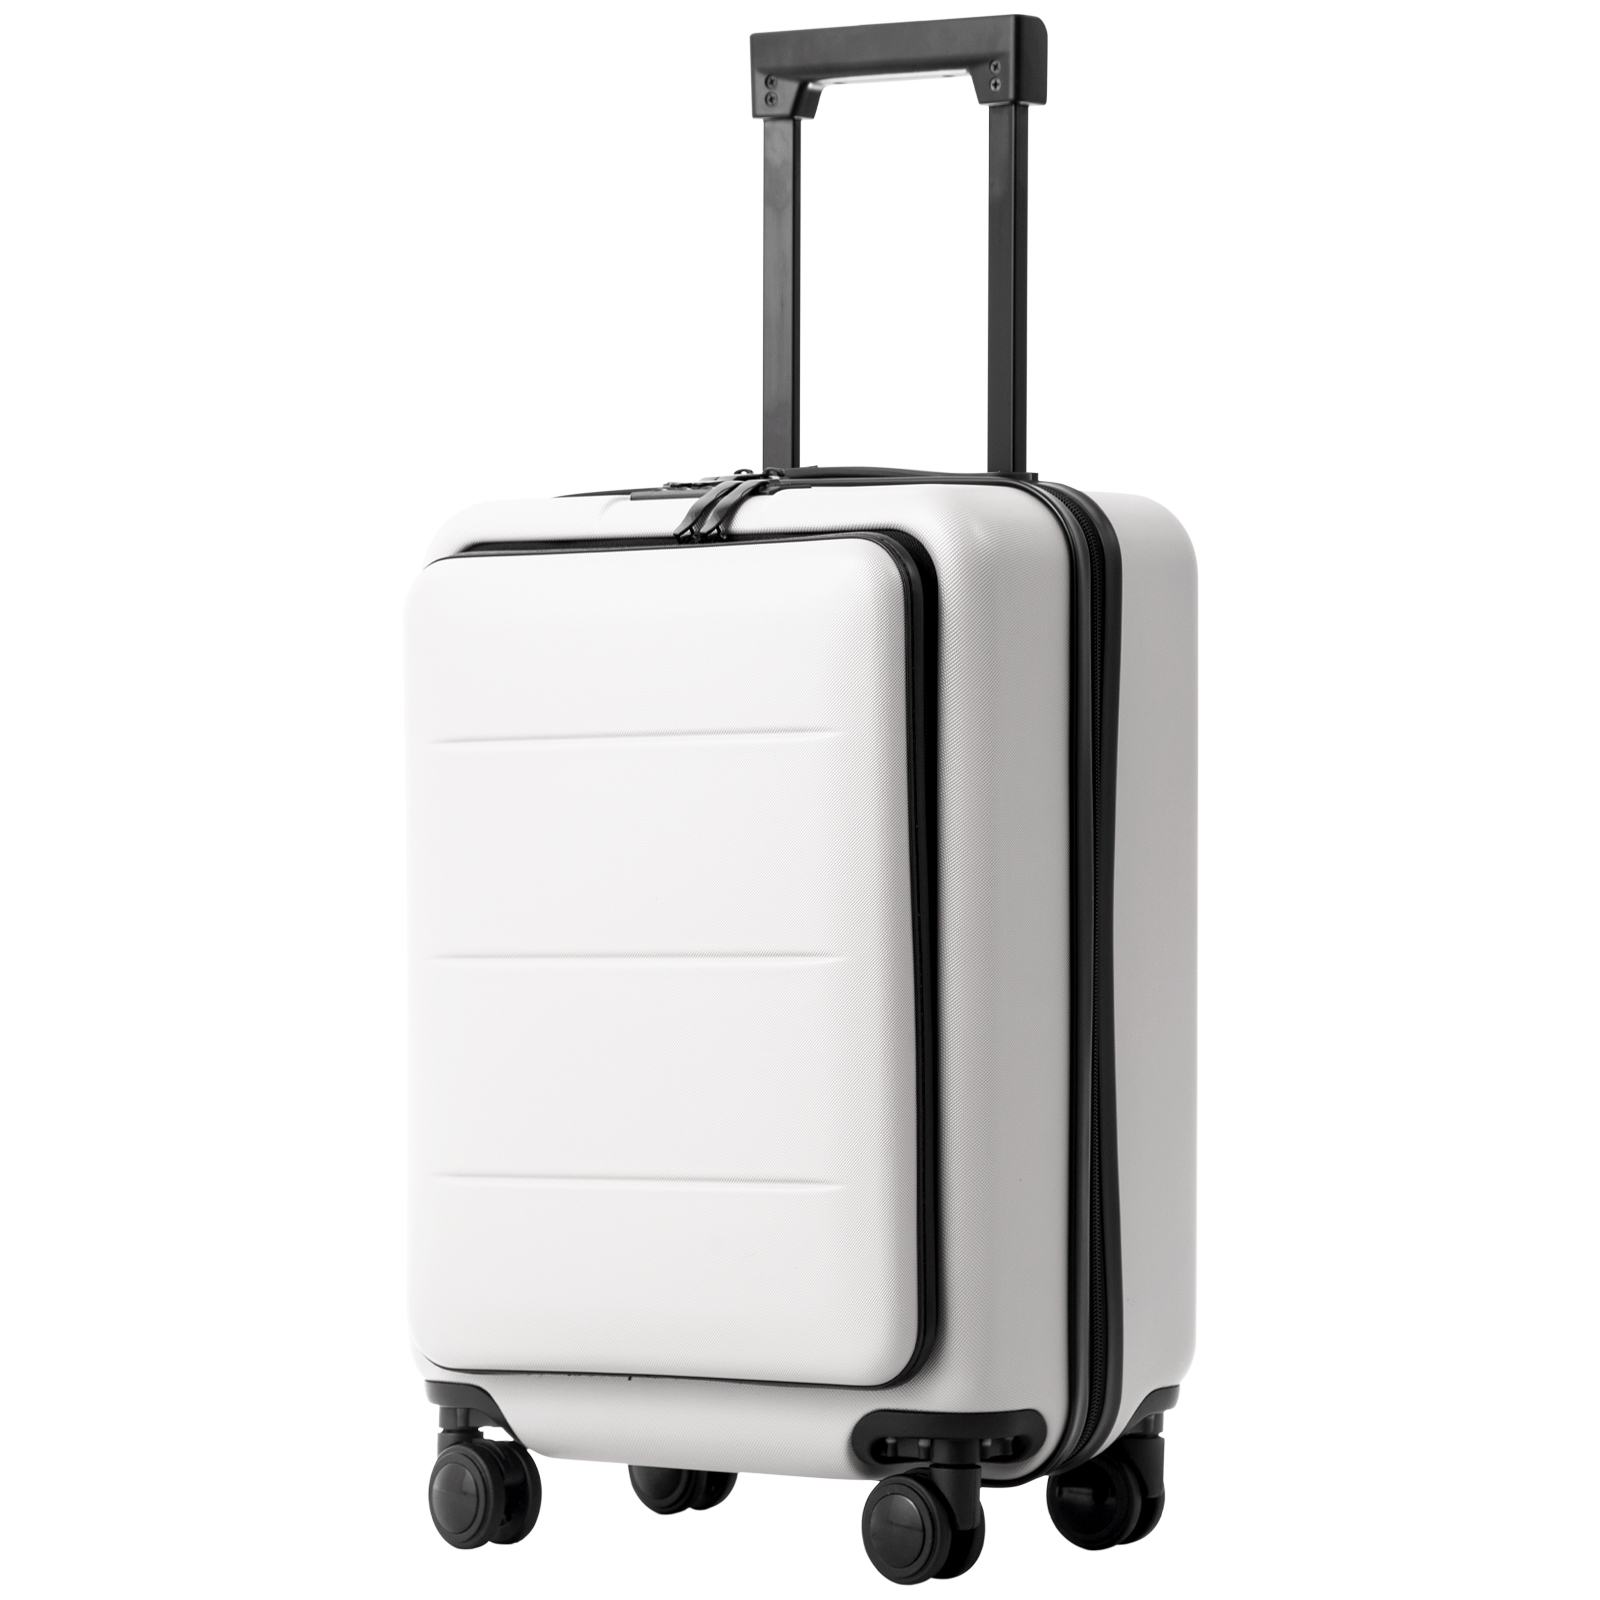 COOLIFE Luggage Suitcase Piece Set Carry On ABS+PC Spinner Trolley with pocket Compartmnet Weekend Bag  YD76S